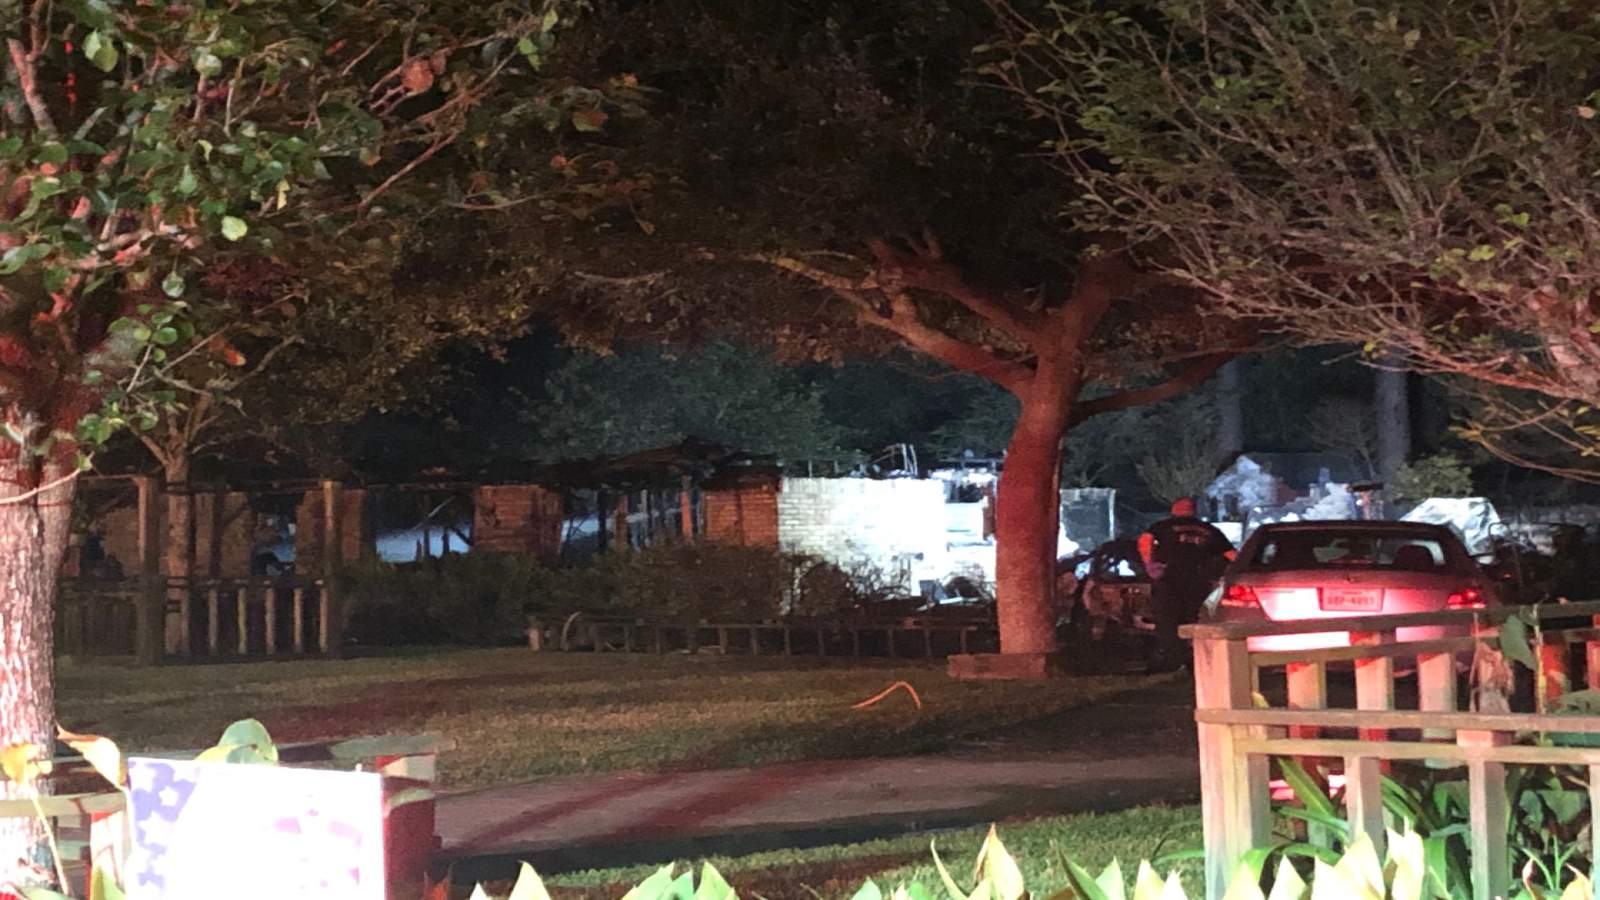 Couple in their 70s injured in massive fire at home in northeast Houston, officials say